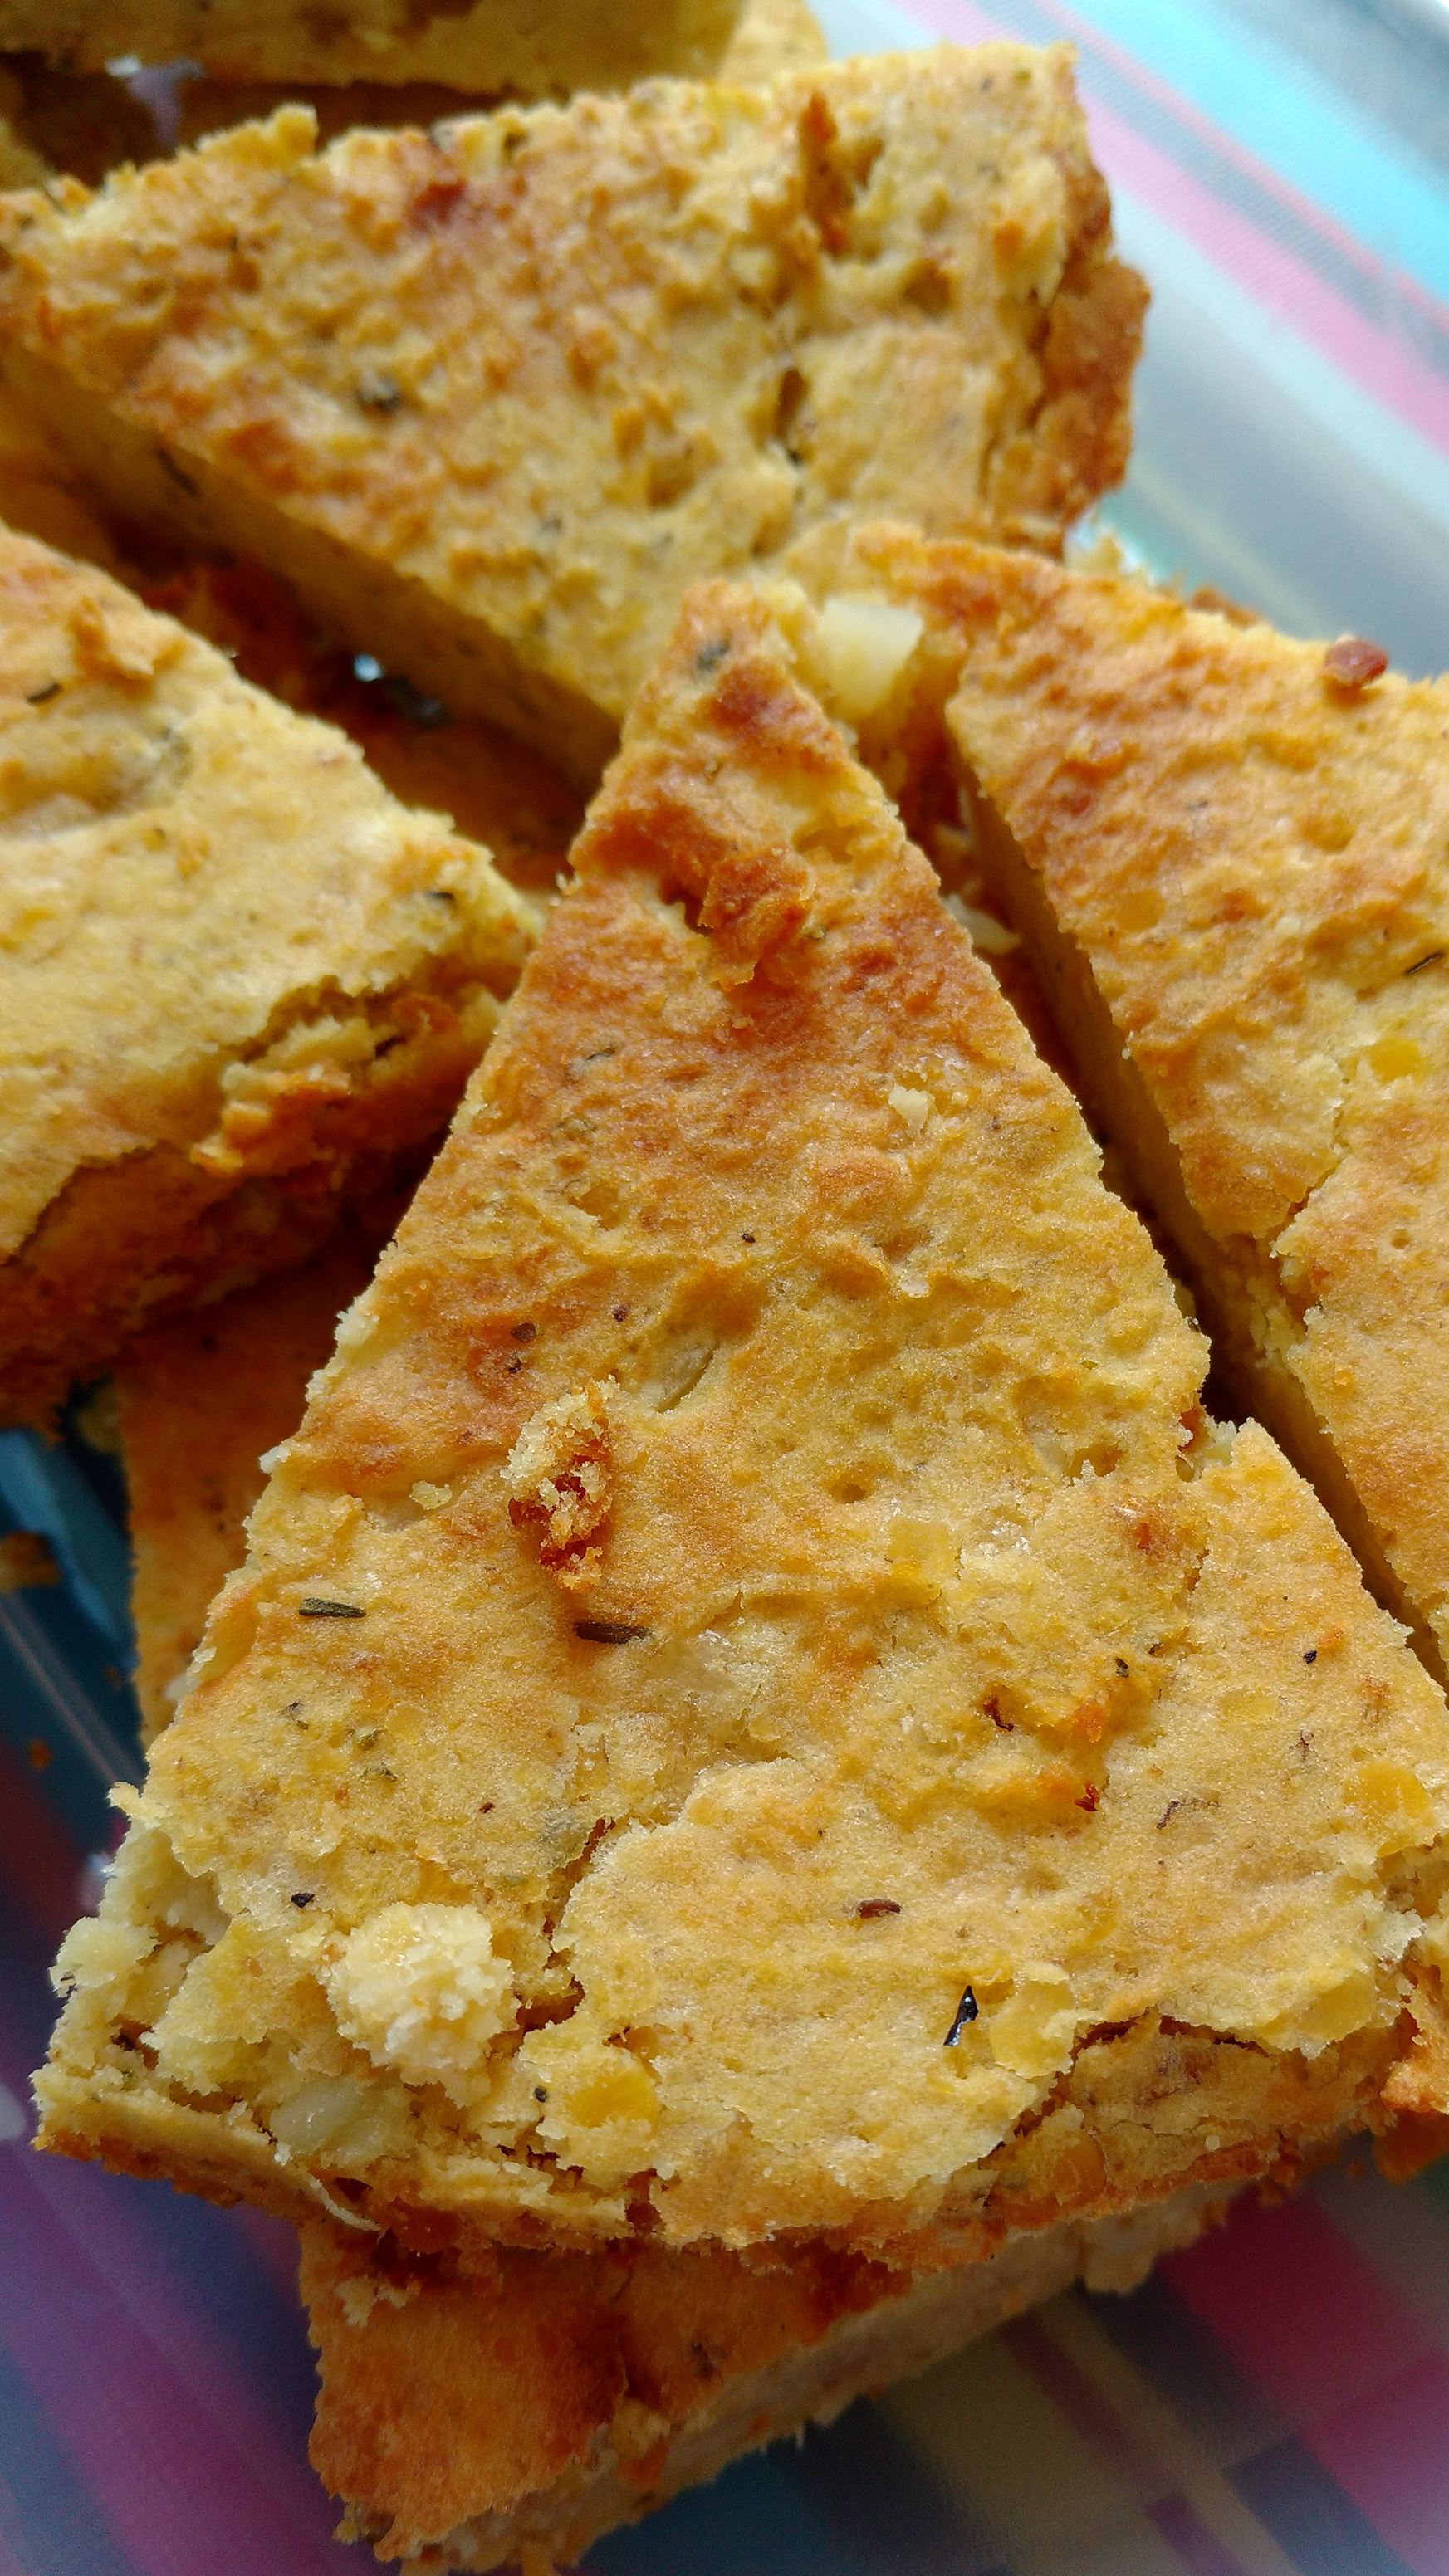 Cheese and lentil wedges